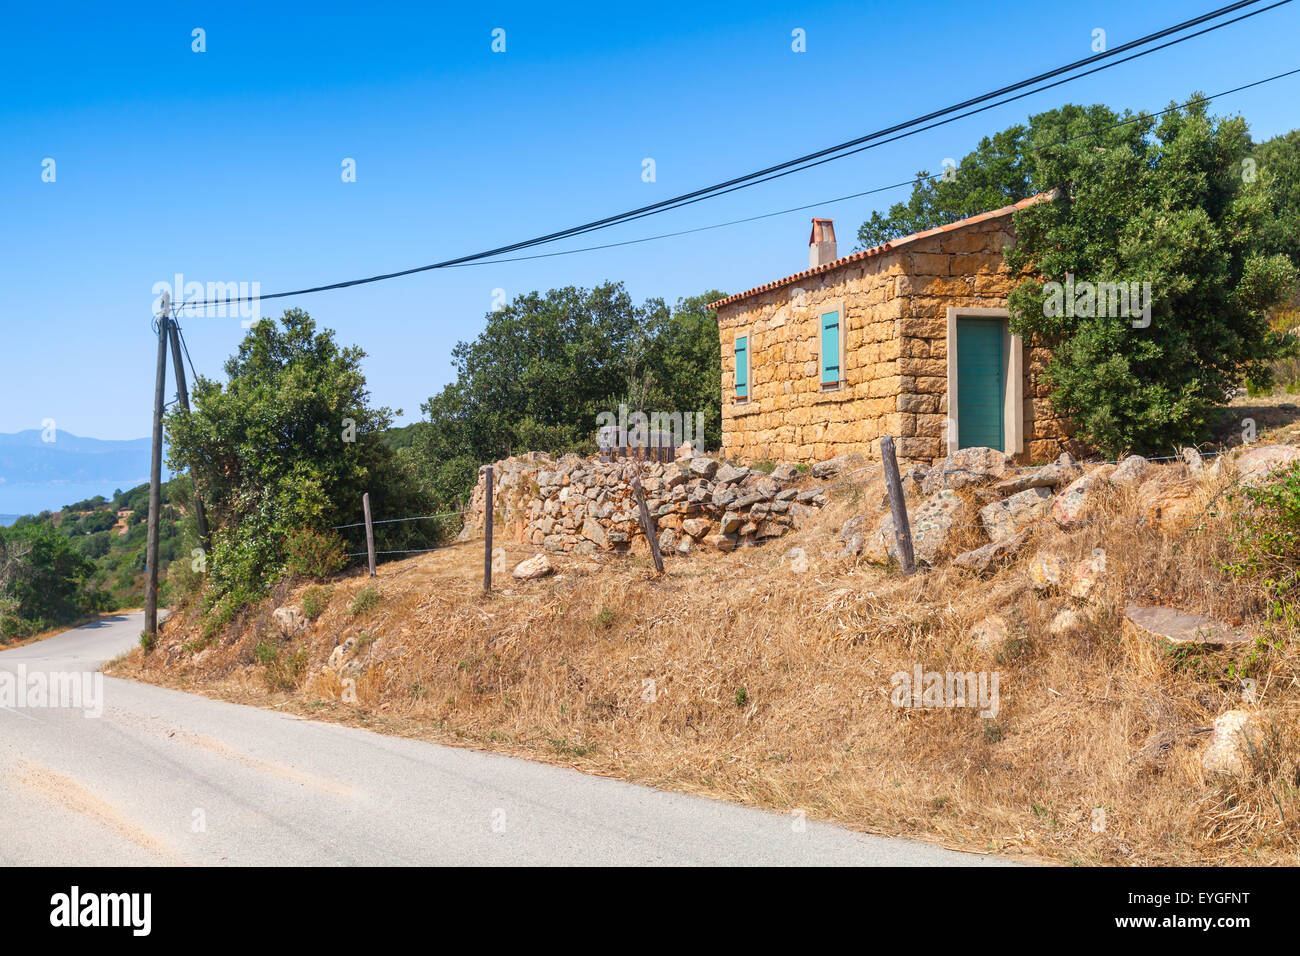 South Corsica, rural landscape with old small house made of yellow stones on a roadside Stock Photo